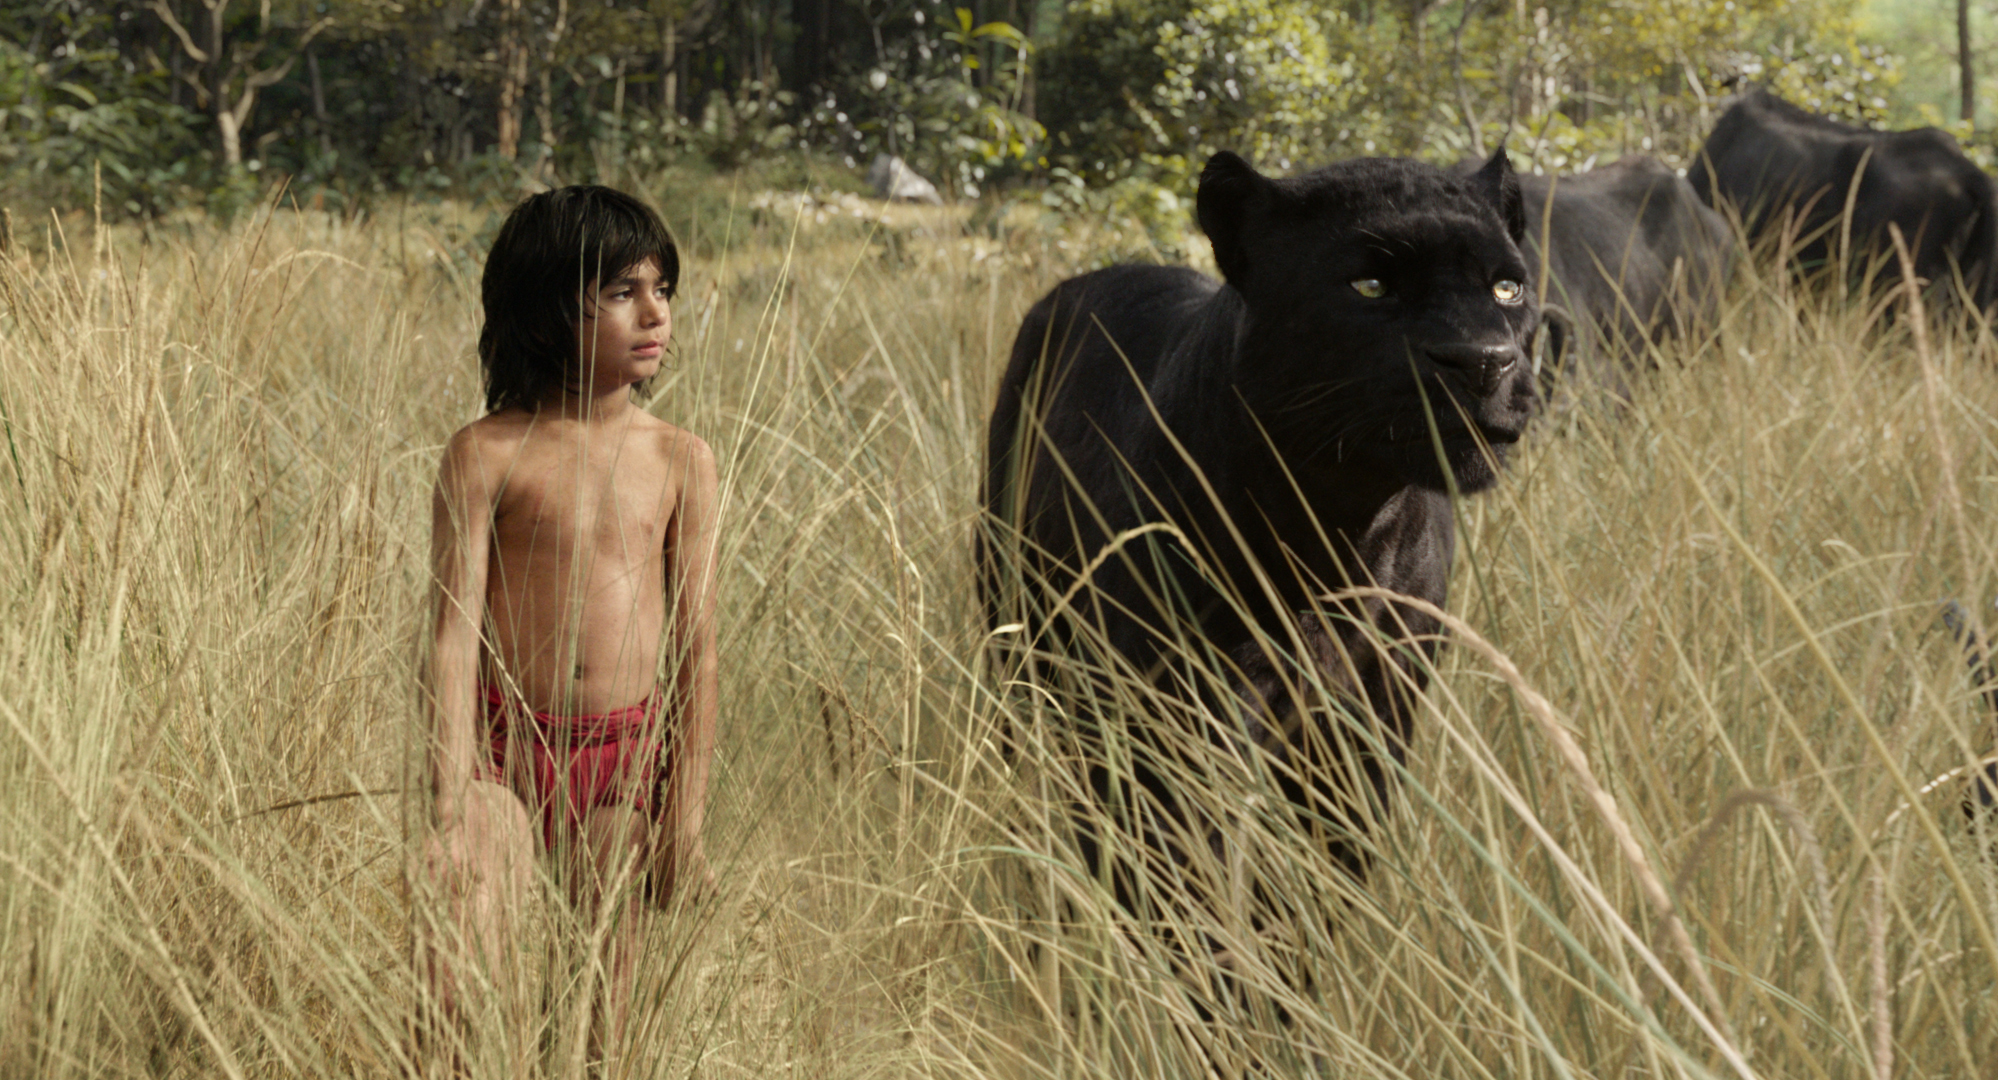 Mowgli (newcomer Neel Sethi) and Bagheera (voice of Ben Kingsley) embark on a captivating journey in ?The Jungle Book,? an all-new live-action epic adventure about Mowgli, a man-cub raised in the jungle by a family of wolves, who is forced to abandon the only home he?s ever known. In theaters April 15, 2016. ..?2015 Disney Enterprises, Inc. All Rights Reserved.